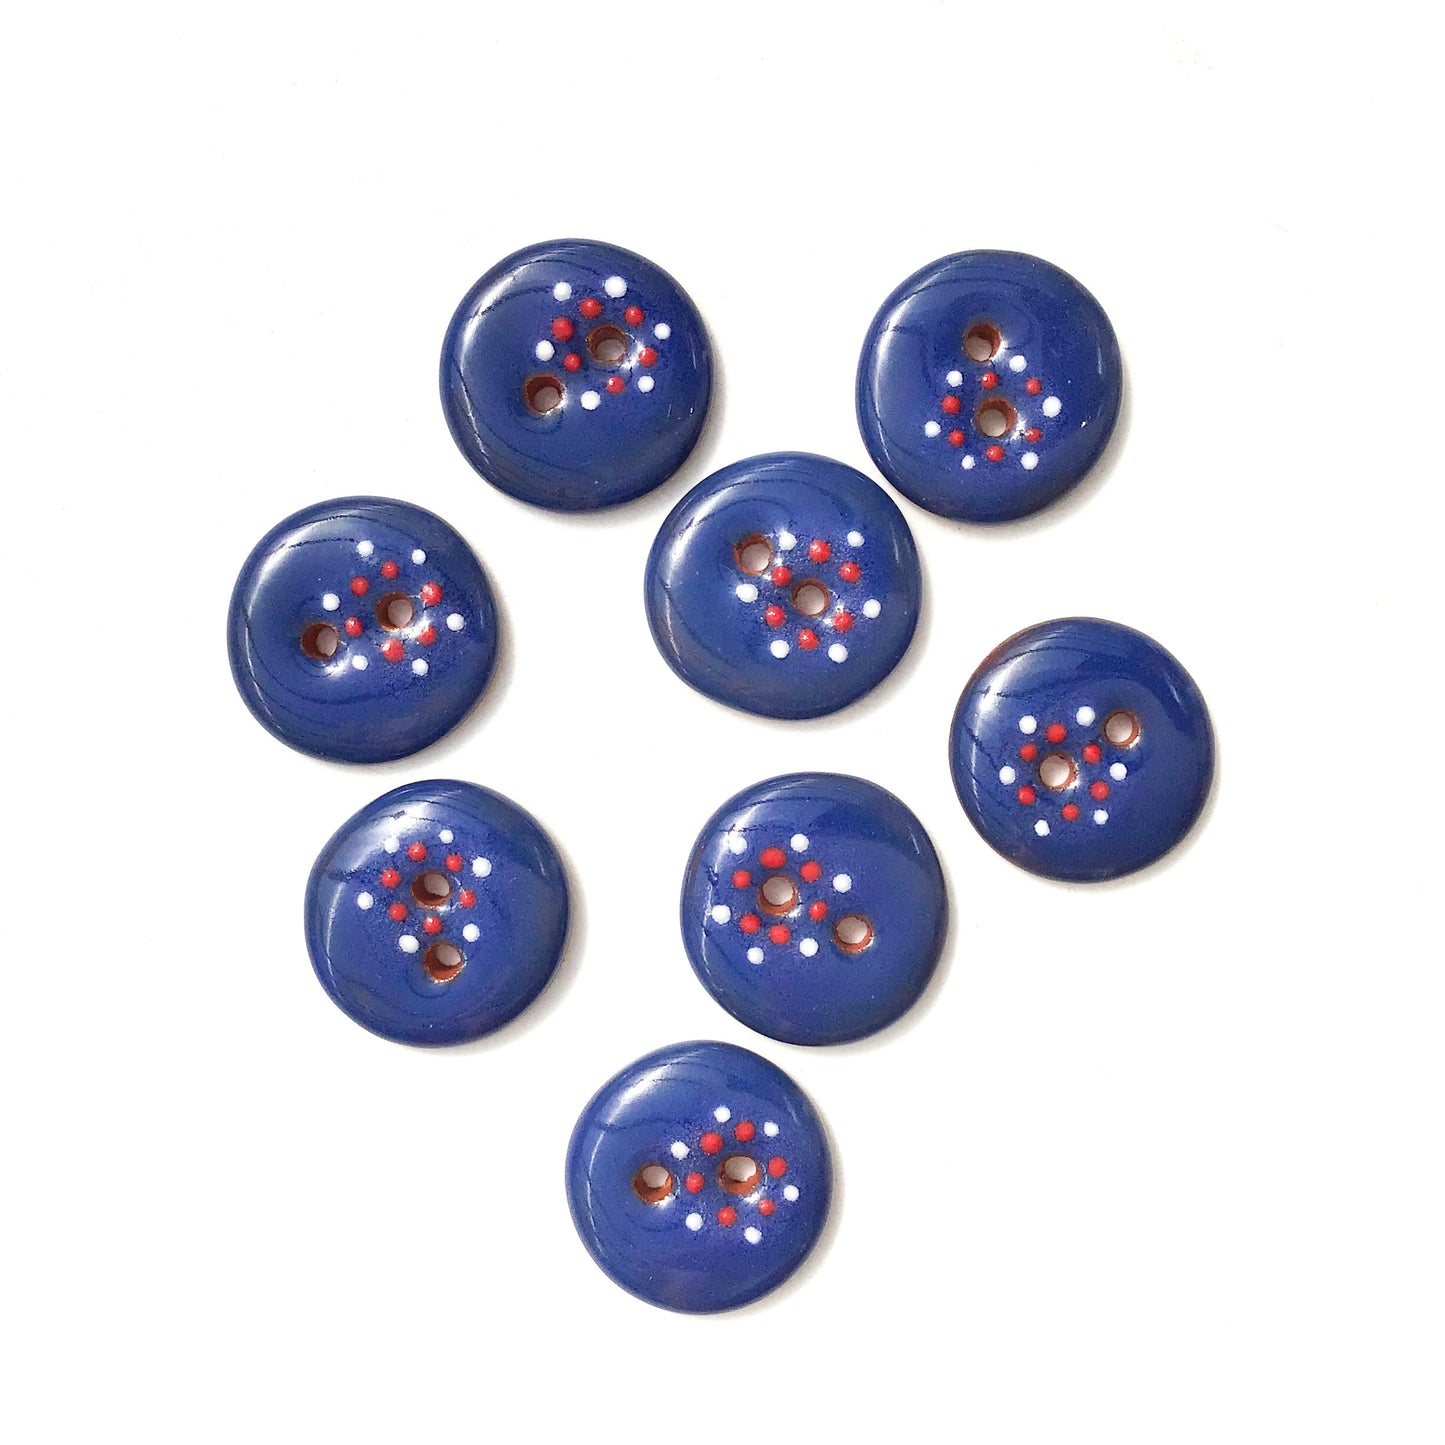 Blue, Red, & White "Spark" Ceramic Buttons - Blue Clay Buttons - 5/8" - 8 Pack